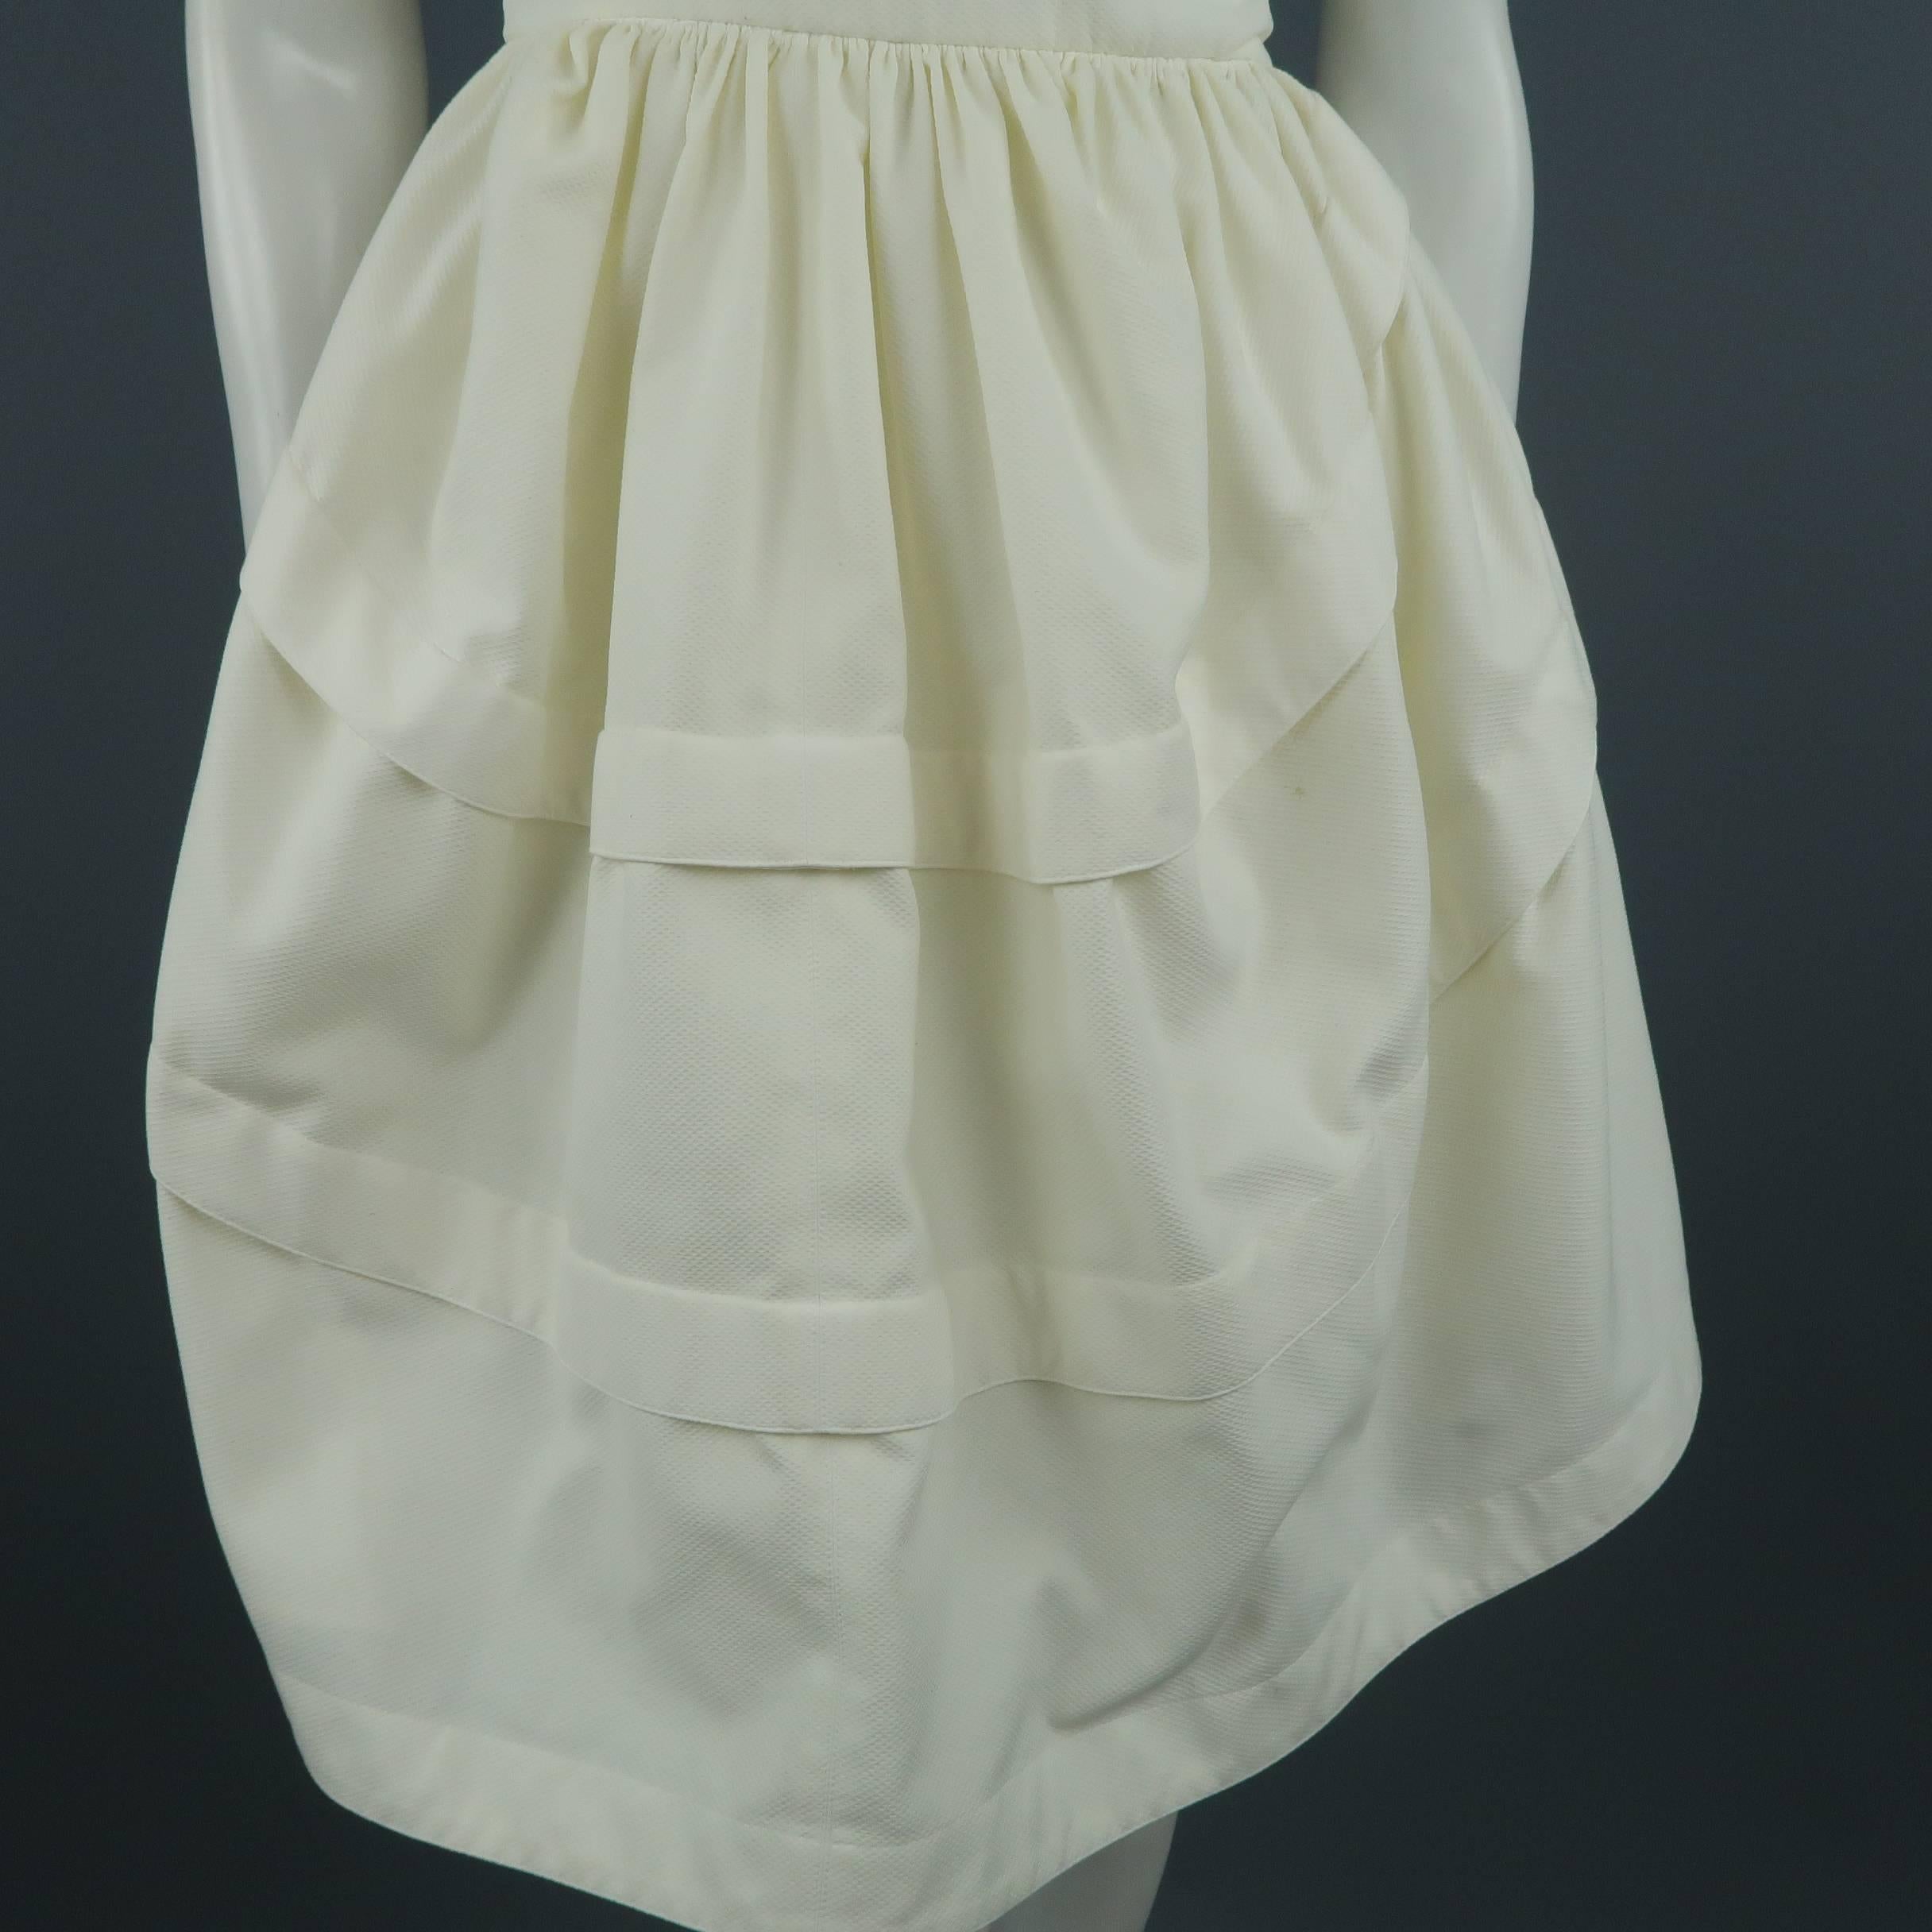 Vintage ALAIA cocktail dress comes in cream cotton textured canvas with an asymmetrical one shoulder sleeveless bodice and gathered puff skirt with draped back. Wear throughput.
 
Fair Pre-Owned Condition.
Marked: (no size)
 
Measurements:
    Bust: